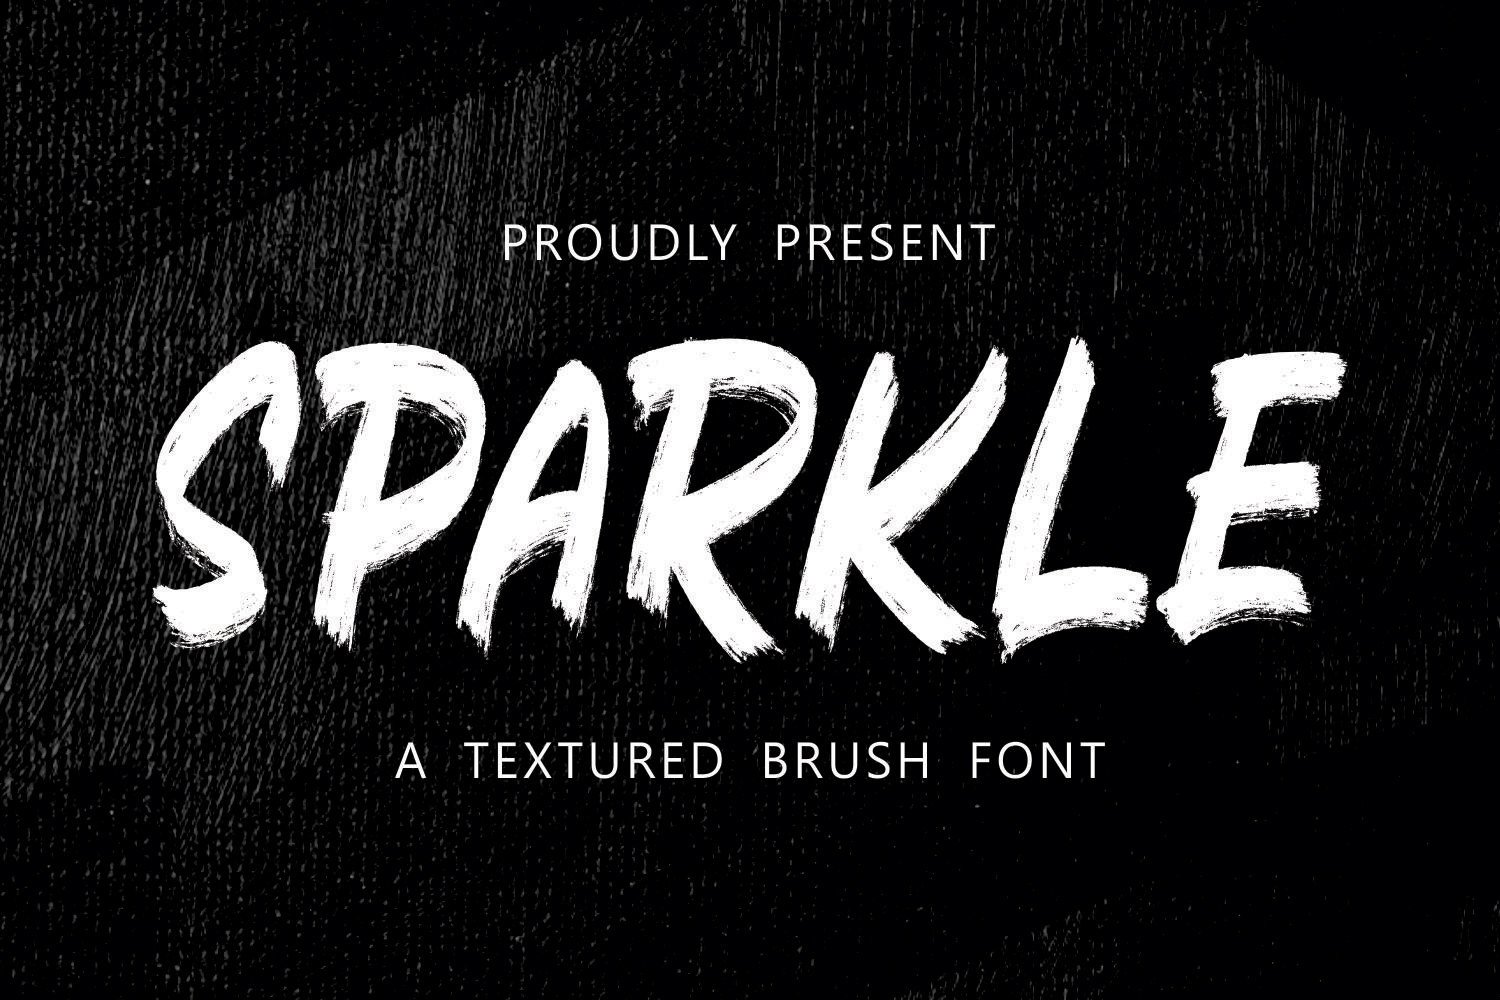 SPARKLE cover image.